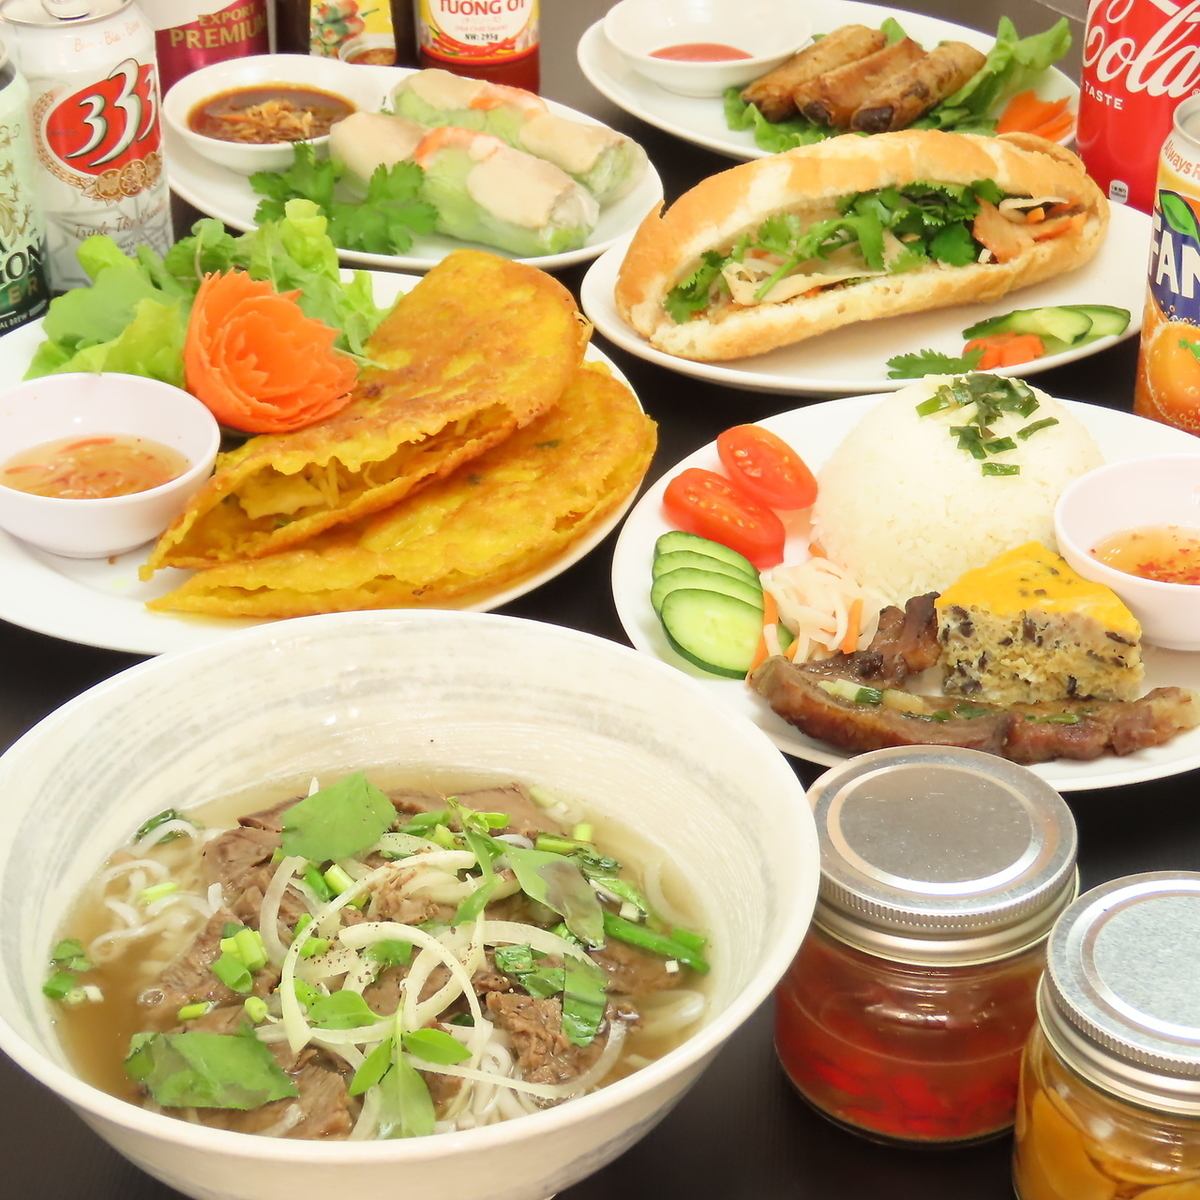 This is a restaurant where you can casually enjoy an authentic Vietnamese lunch!